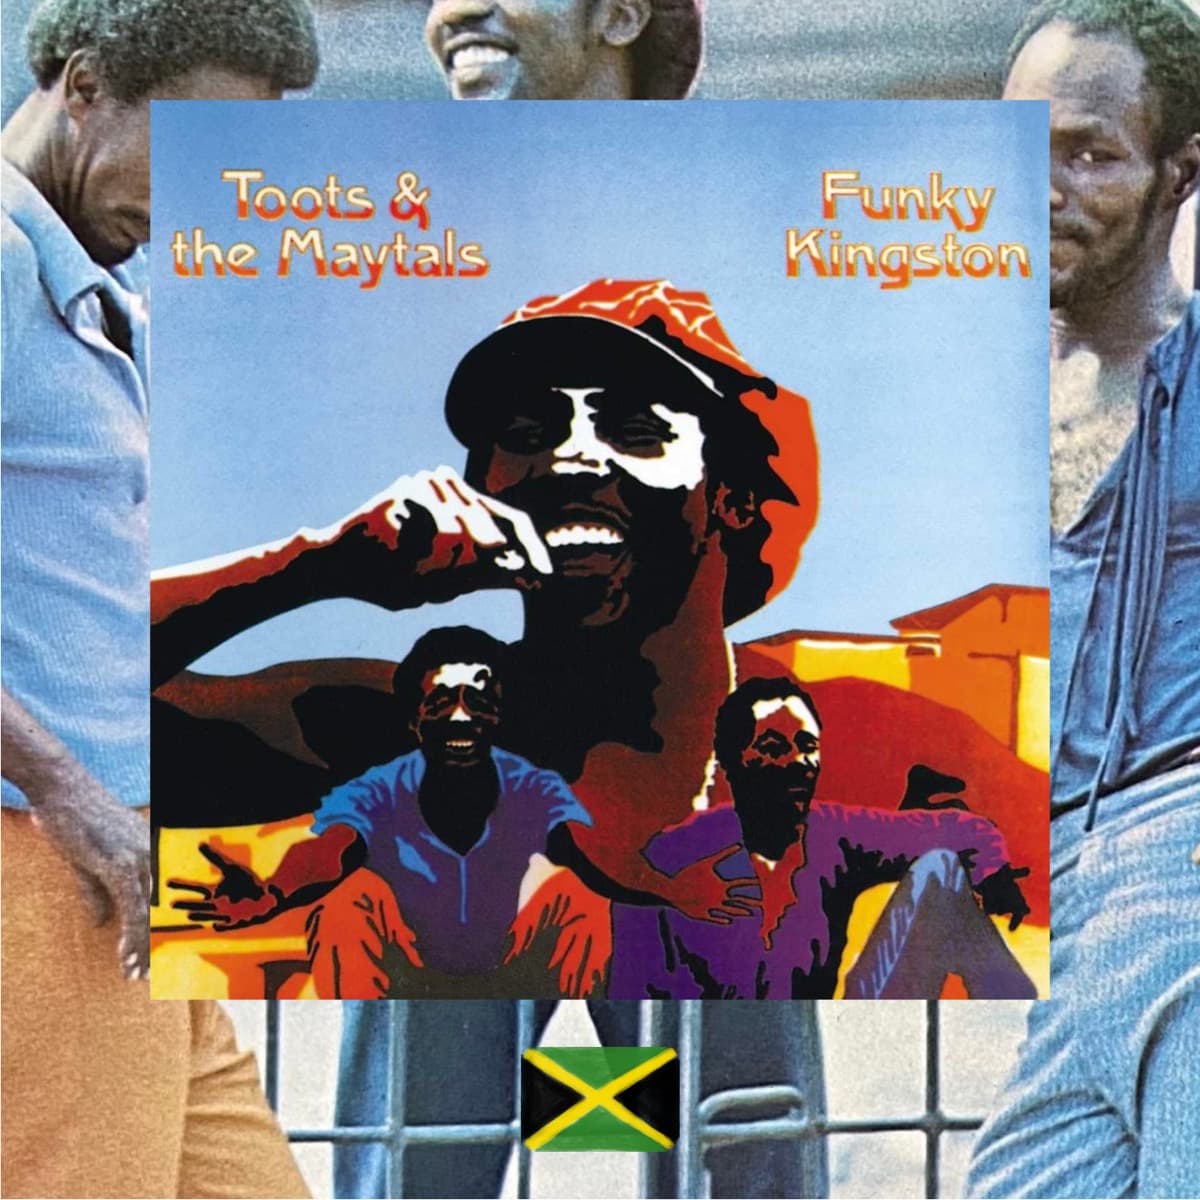 Funky Kingston, Toots & the Maytals, album review